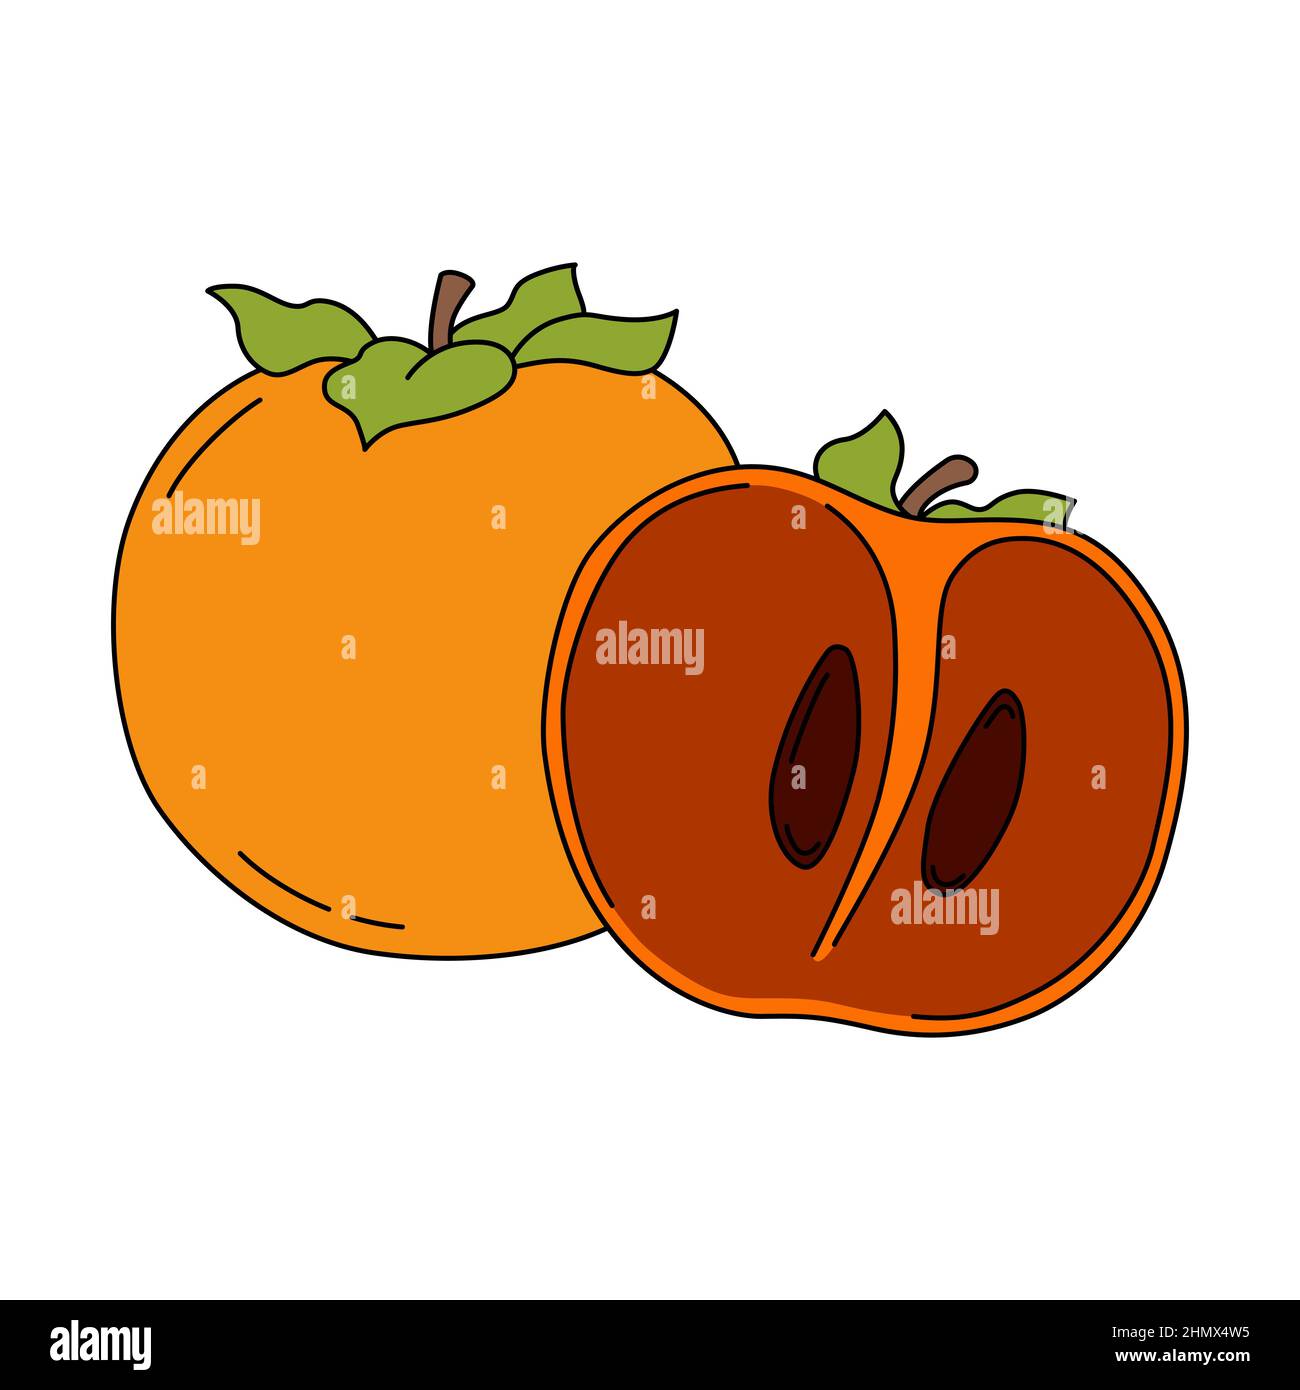 Vector illustration of a persimmon. Half of persimmon in cartoon style. Isolated on white background Stock Vector